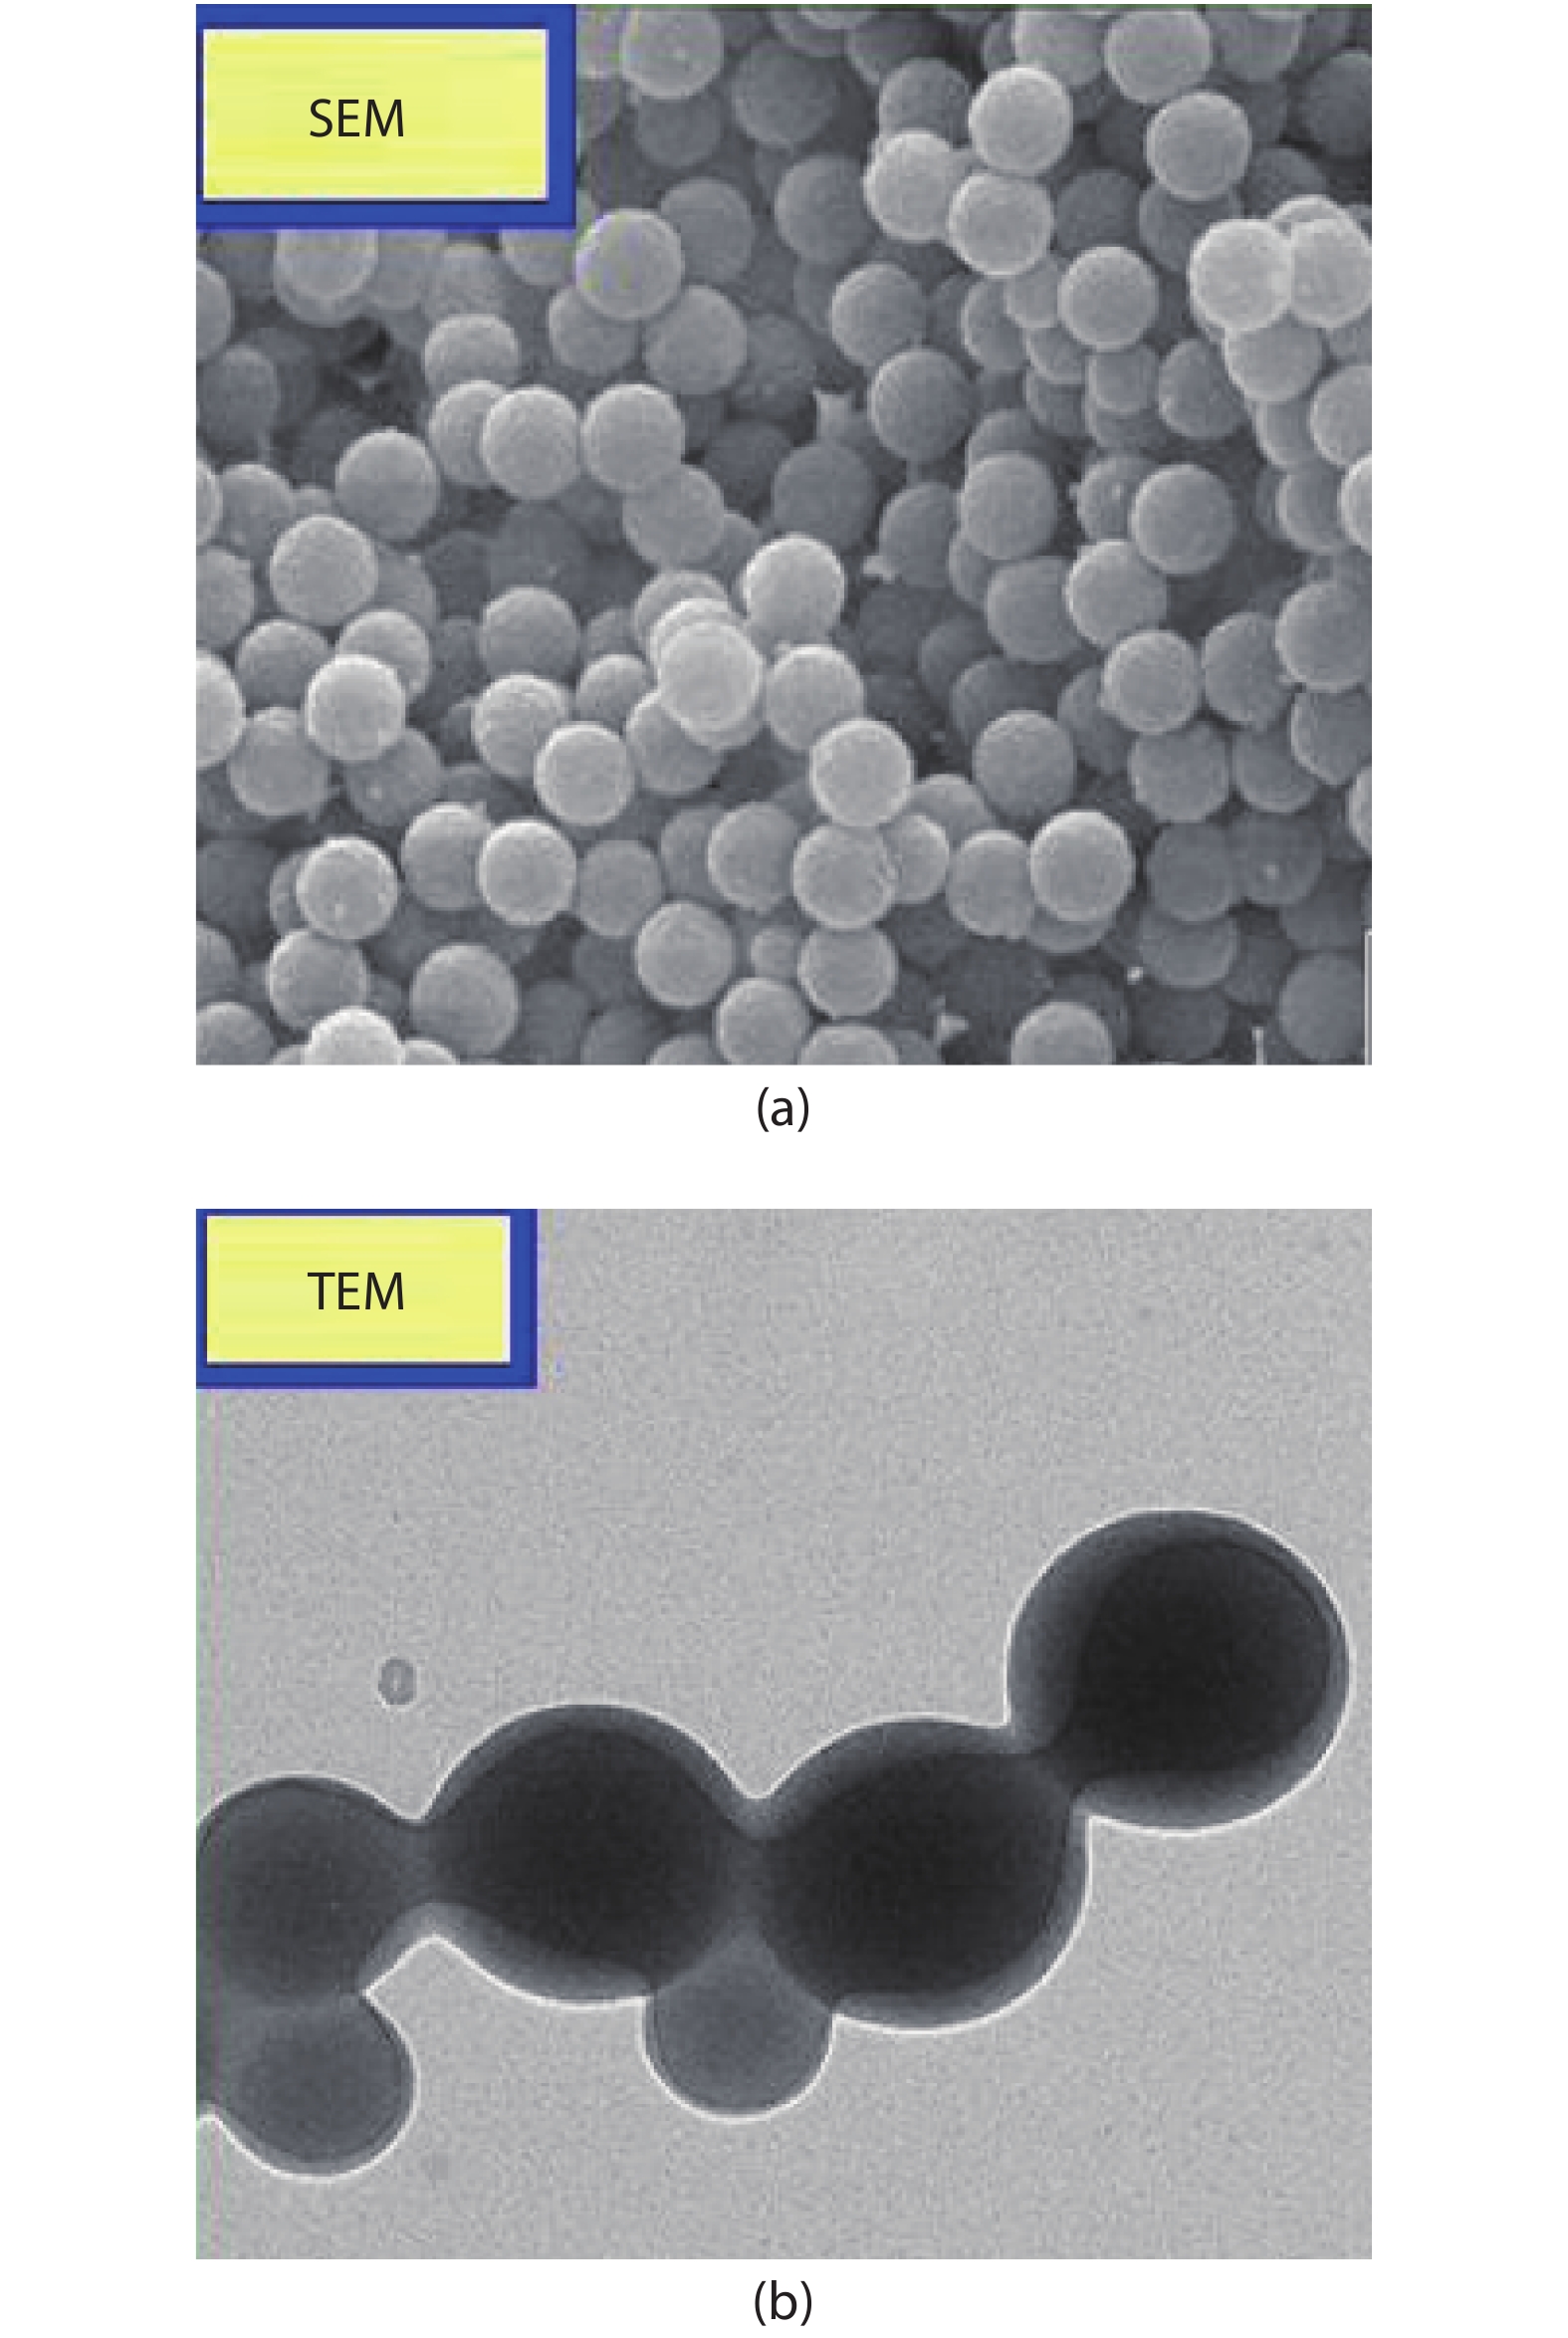 Structure characterization of the CNSs. (a) Image of the CNSs under the SEM. (b) Image of the CNSs under the TEM. (Reproduced with permission from Ref. [18].)